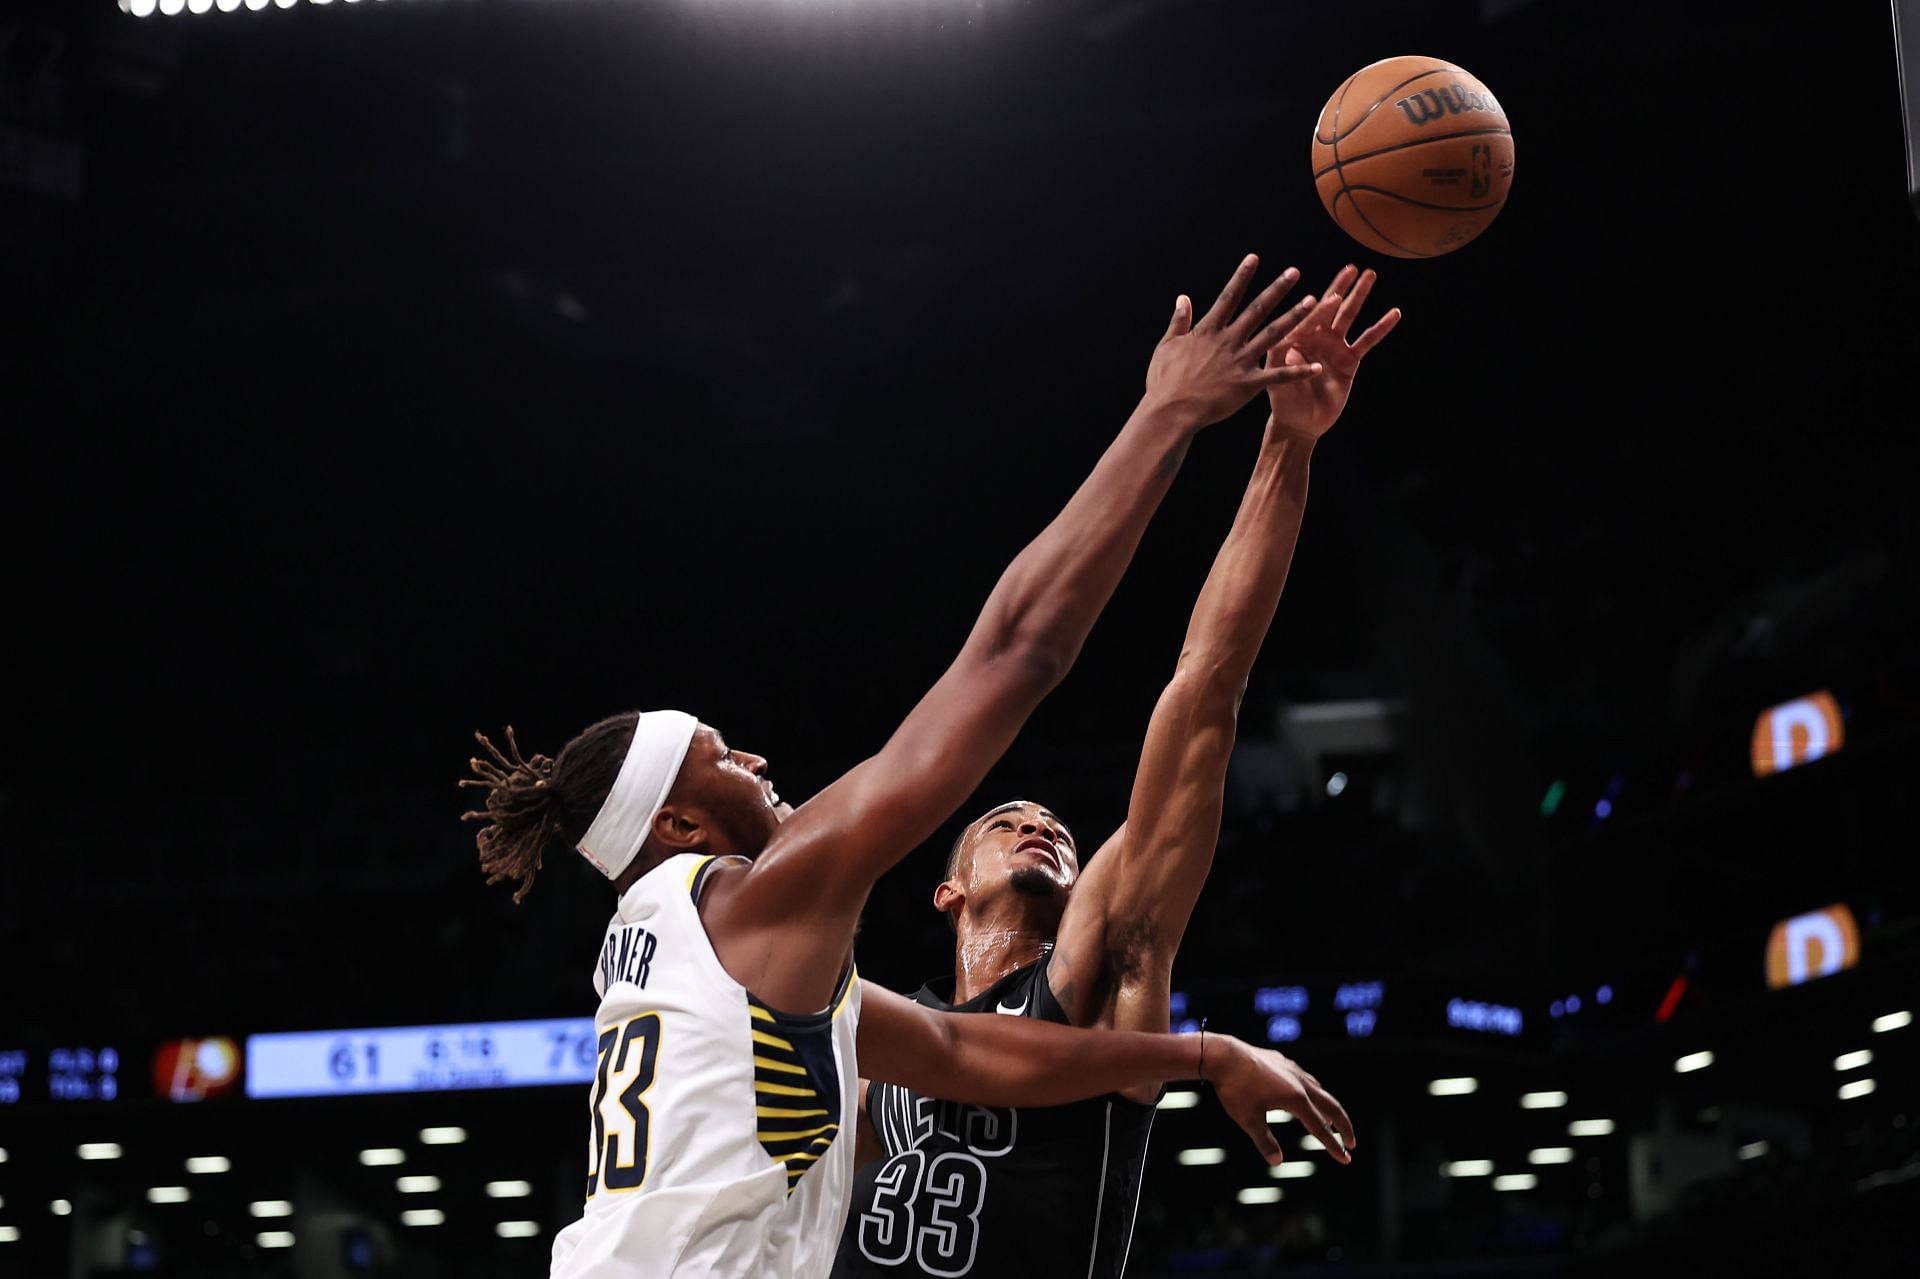 Myles Turner and Nic Claxton have comparable contracts leading fans to debate